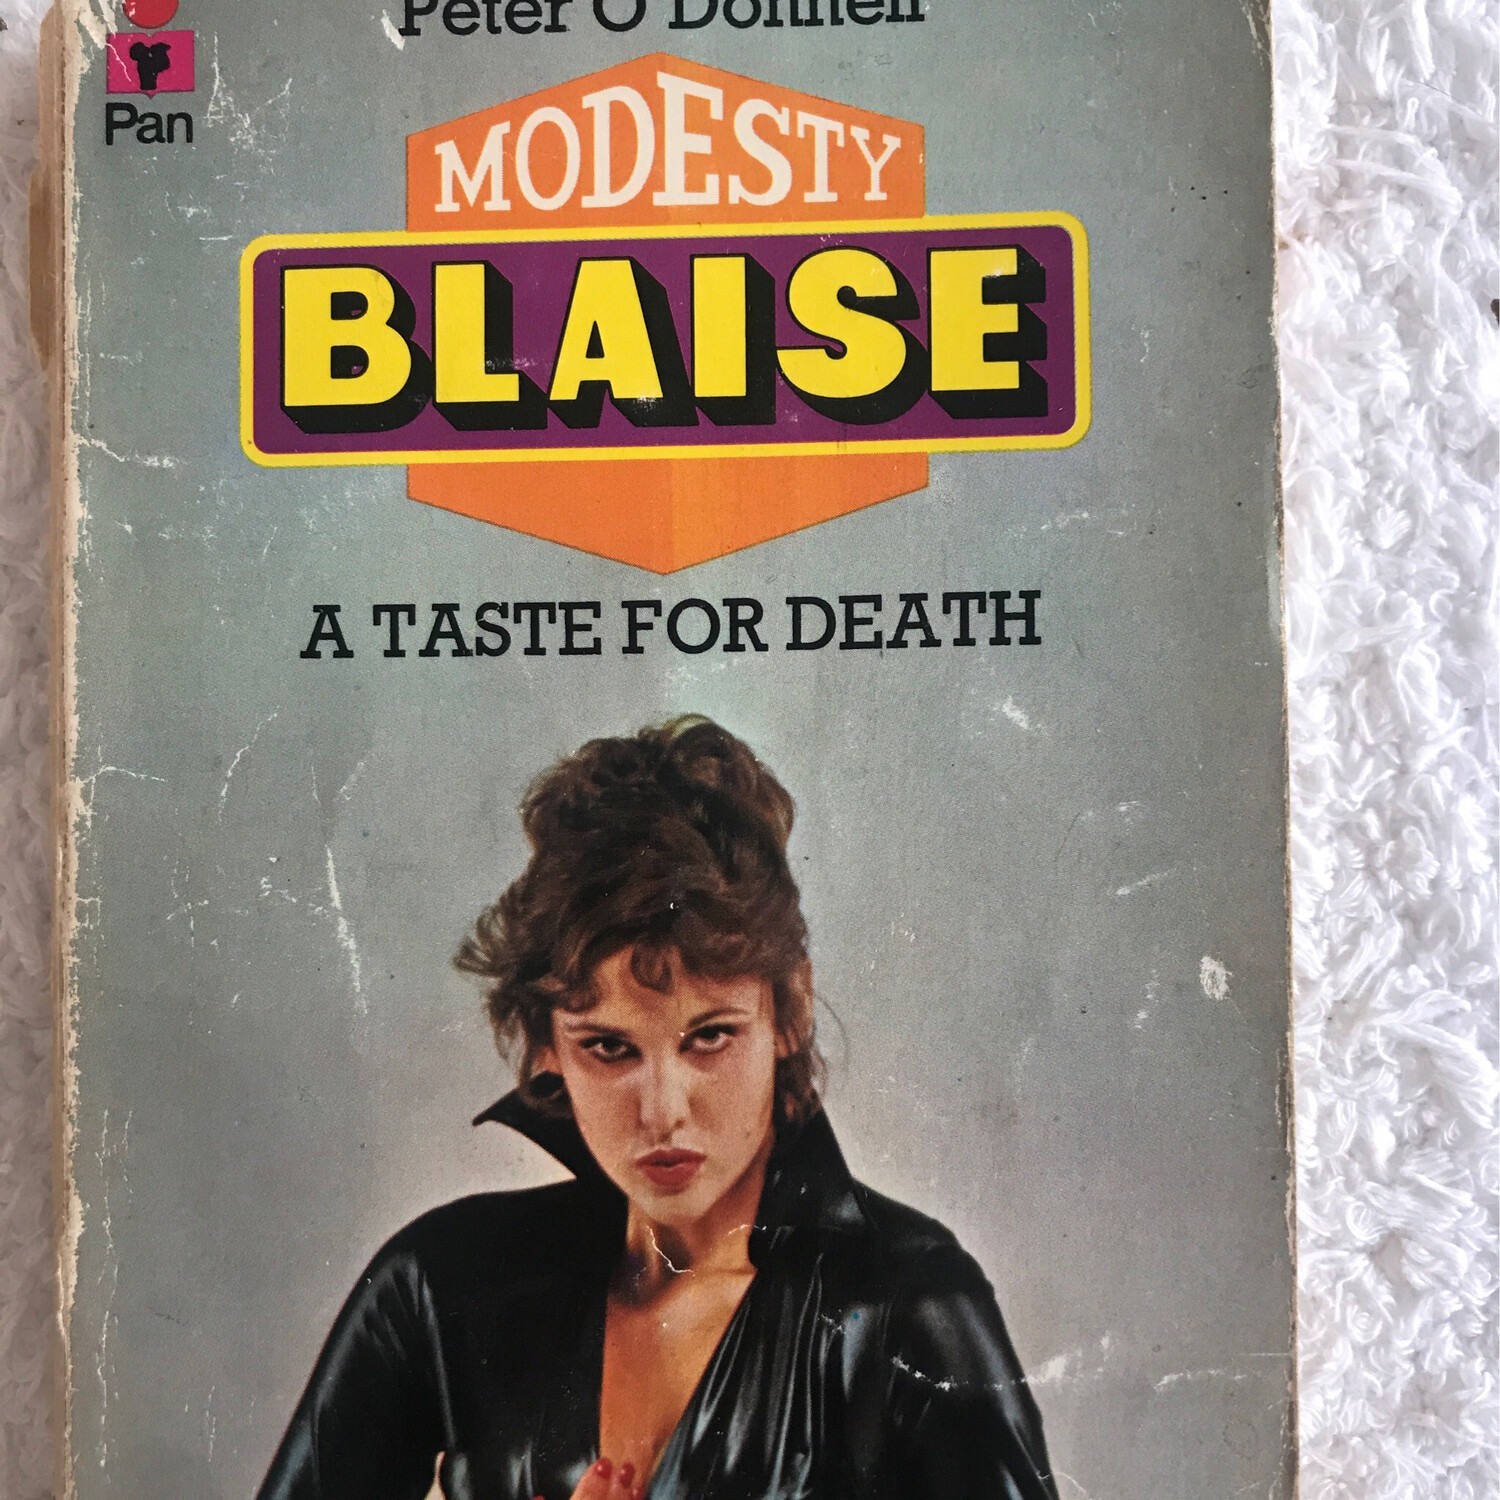 Modesty Blaise, A Taste For Death, Peter O’Donnell